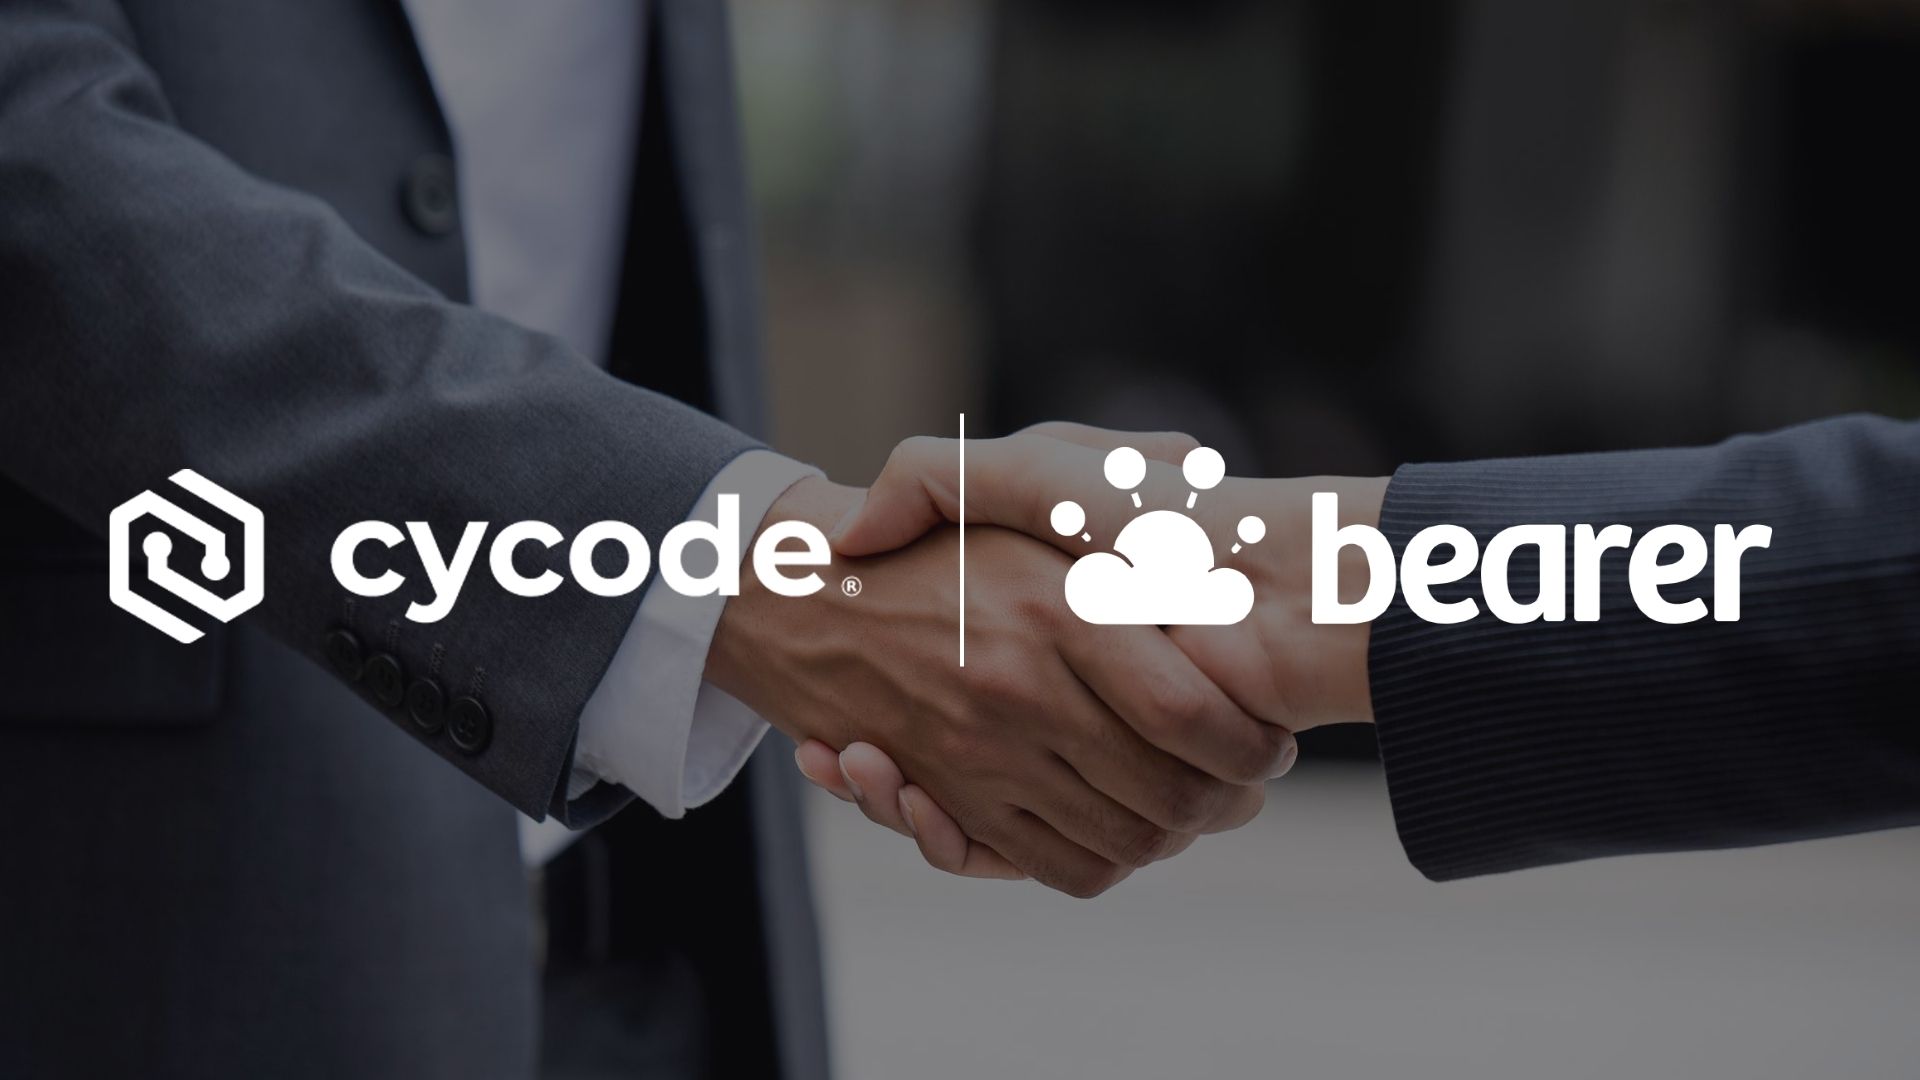 Cycode Completes Acquisition of Bearer, Launches Cygives Initiative for Developer Security